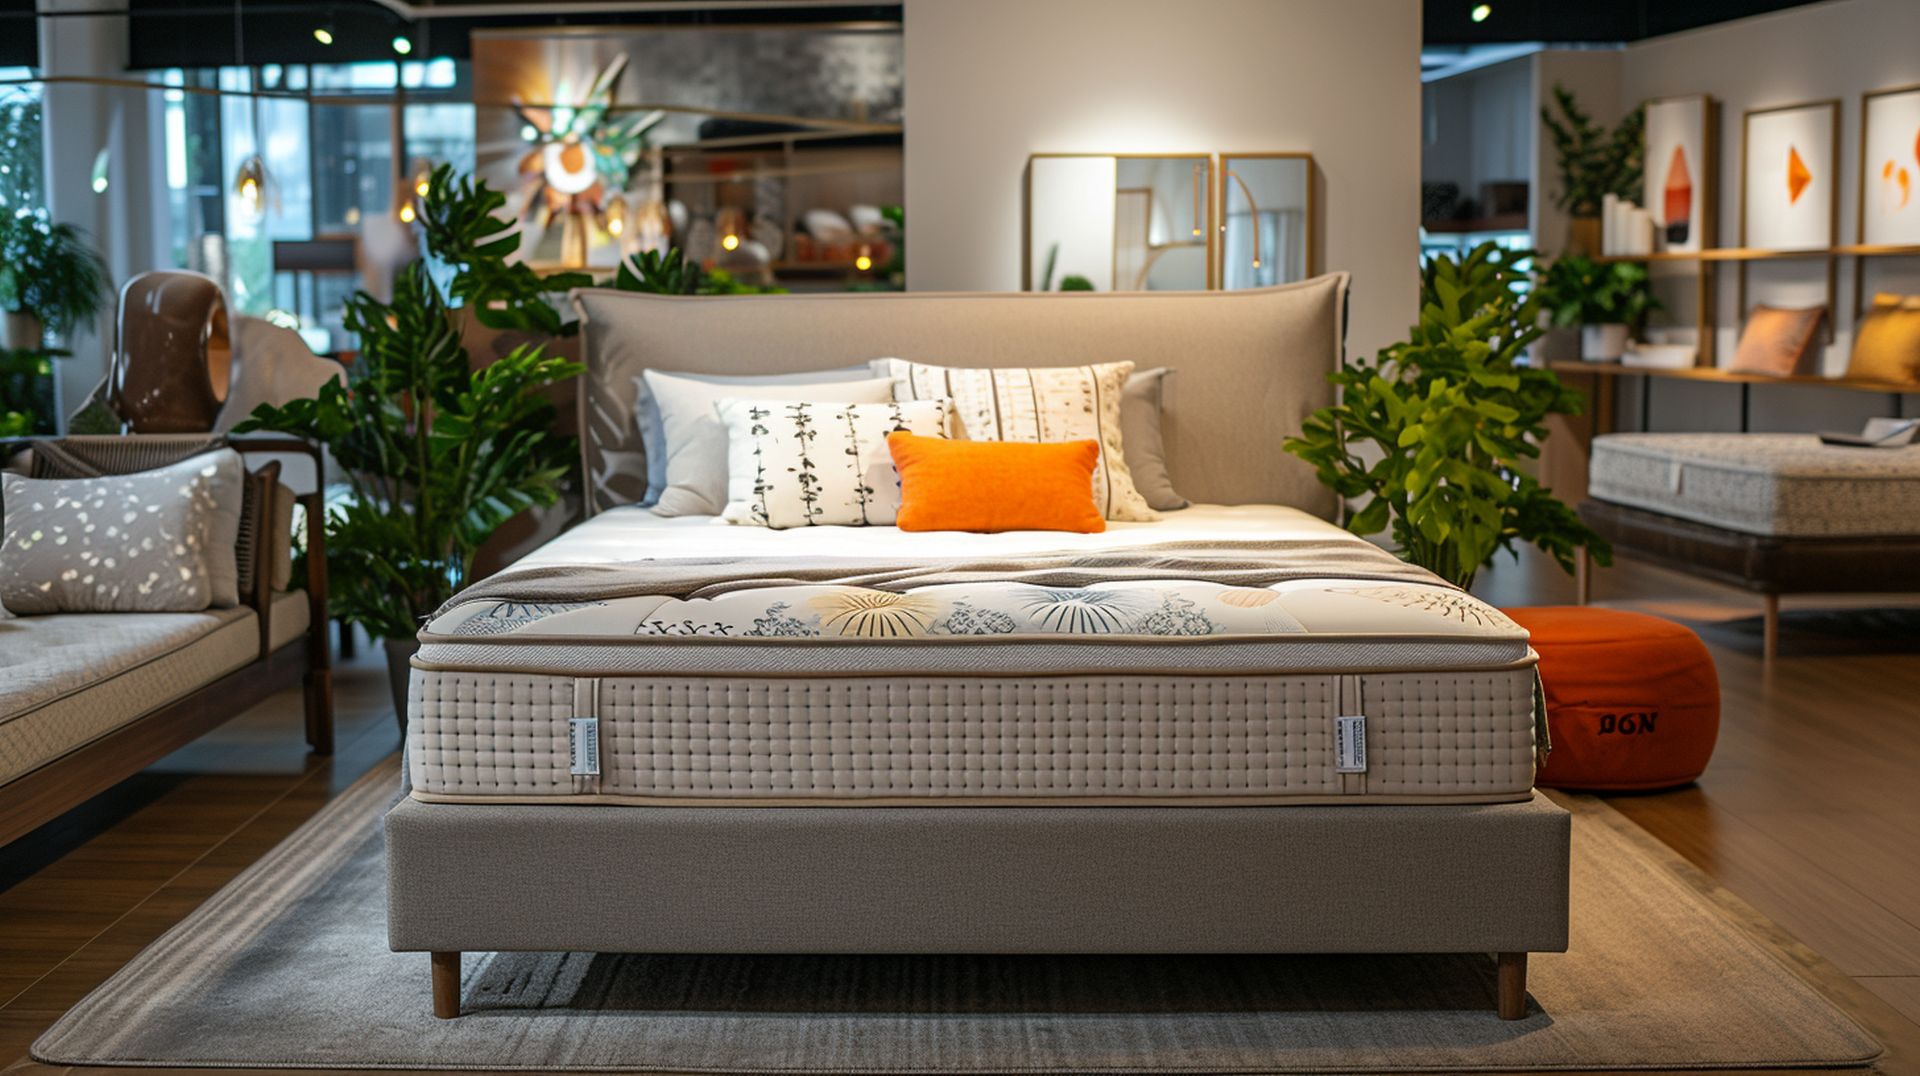 If you're looking for a new bed, mattress stores in Fayetteville offer the best customer and delivery service, financing, and warranties in Arkansas